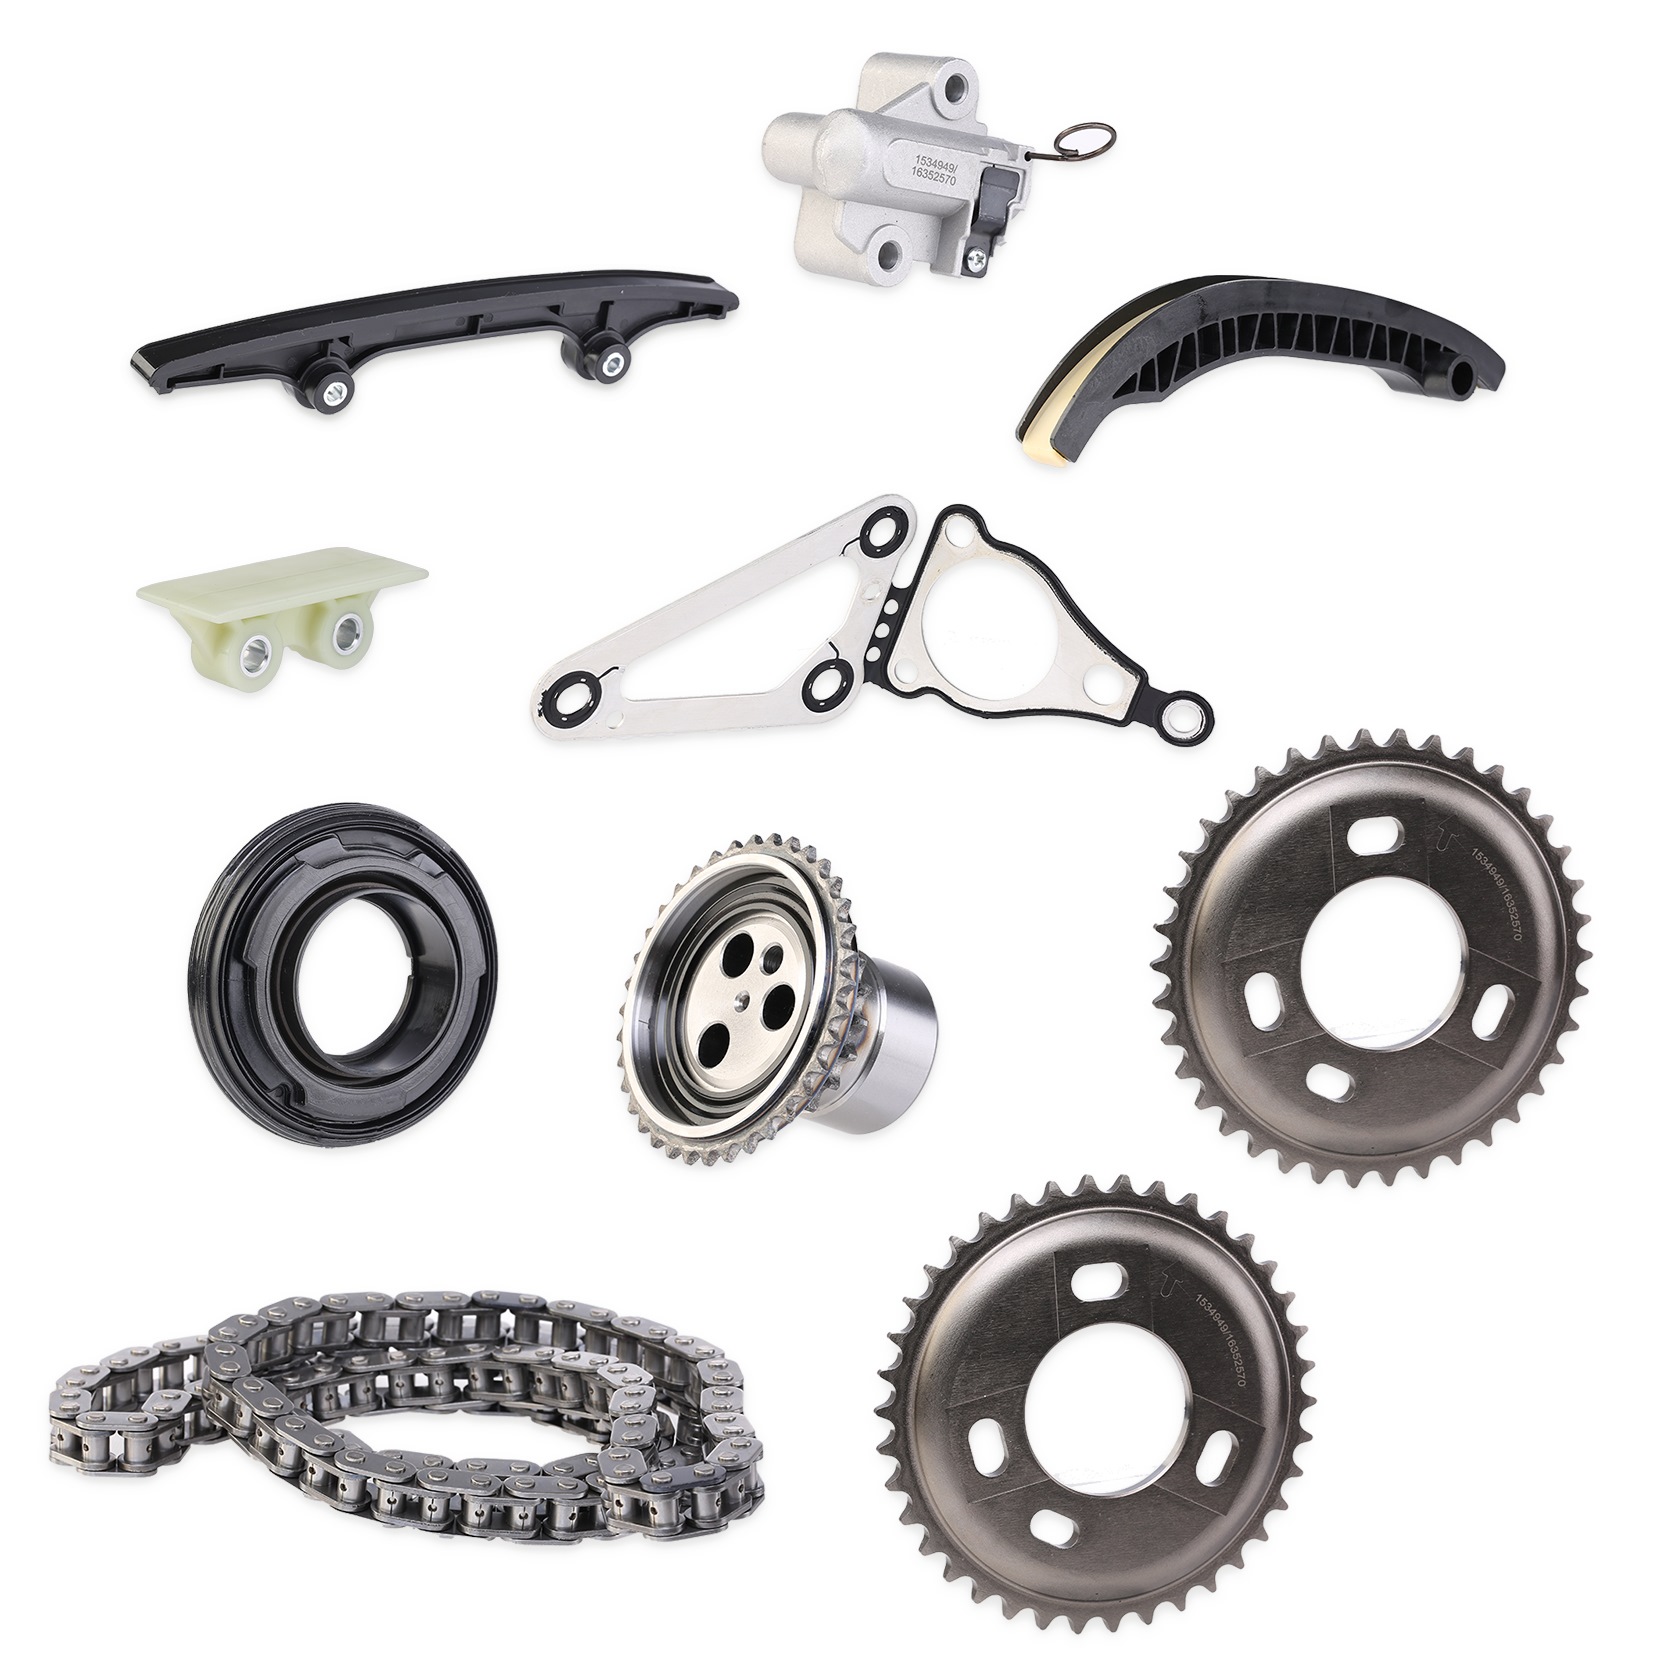 SKTCK-22440377 STARK Timing chain set FIAT with gaskets/seals, with gear, Simplex, Bolt Chain